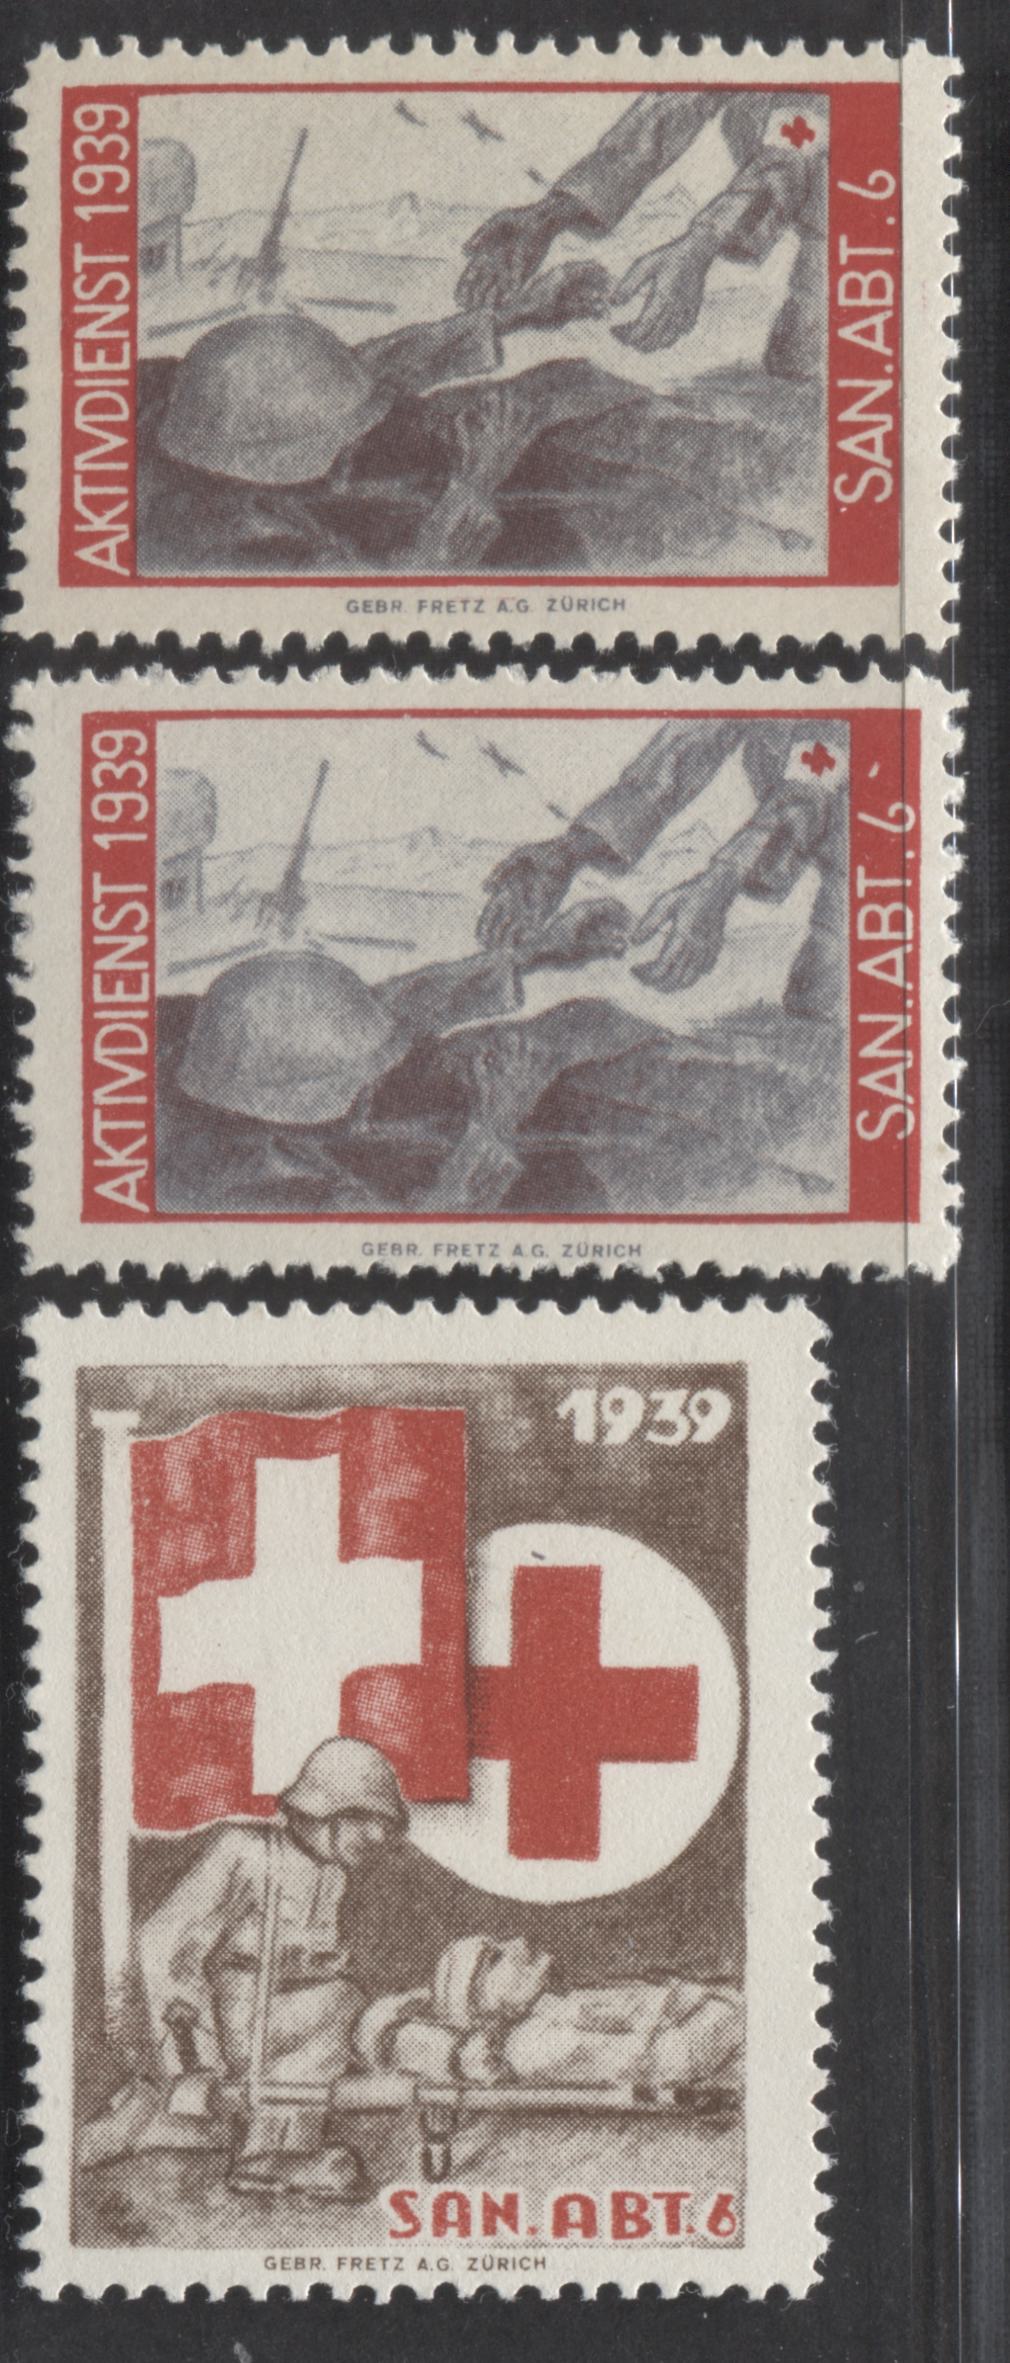 Lot 99 Switzerland SC#Unlisted  1939 Military Stamp Issue - GEB.SAN.ABT.6 Division, Normal And With Apostrophe After '6', And Transport D'Un Blesse, 3 F/VFNH and F/VFOG Examples, Click on Listing to See ALL Pictures, Estimated Value $10 USD